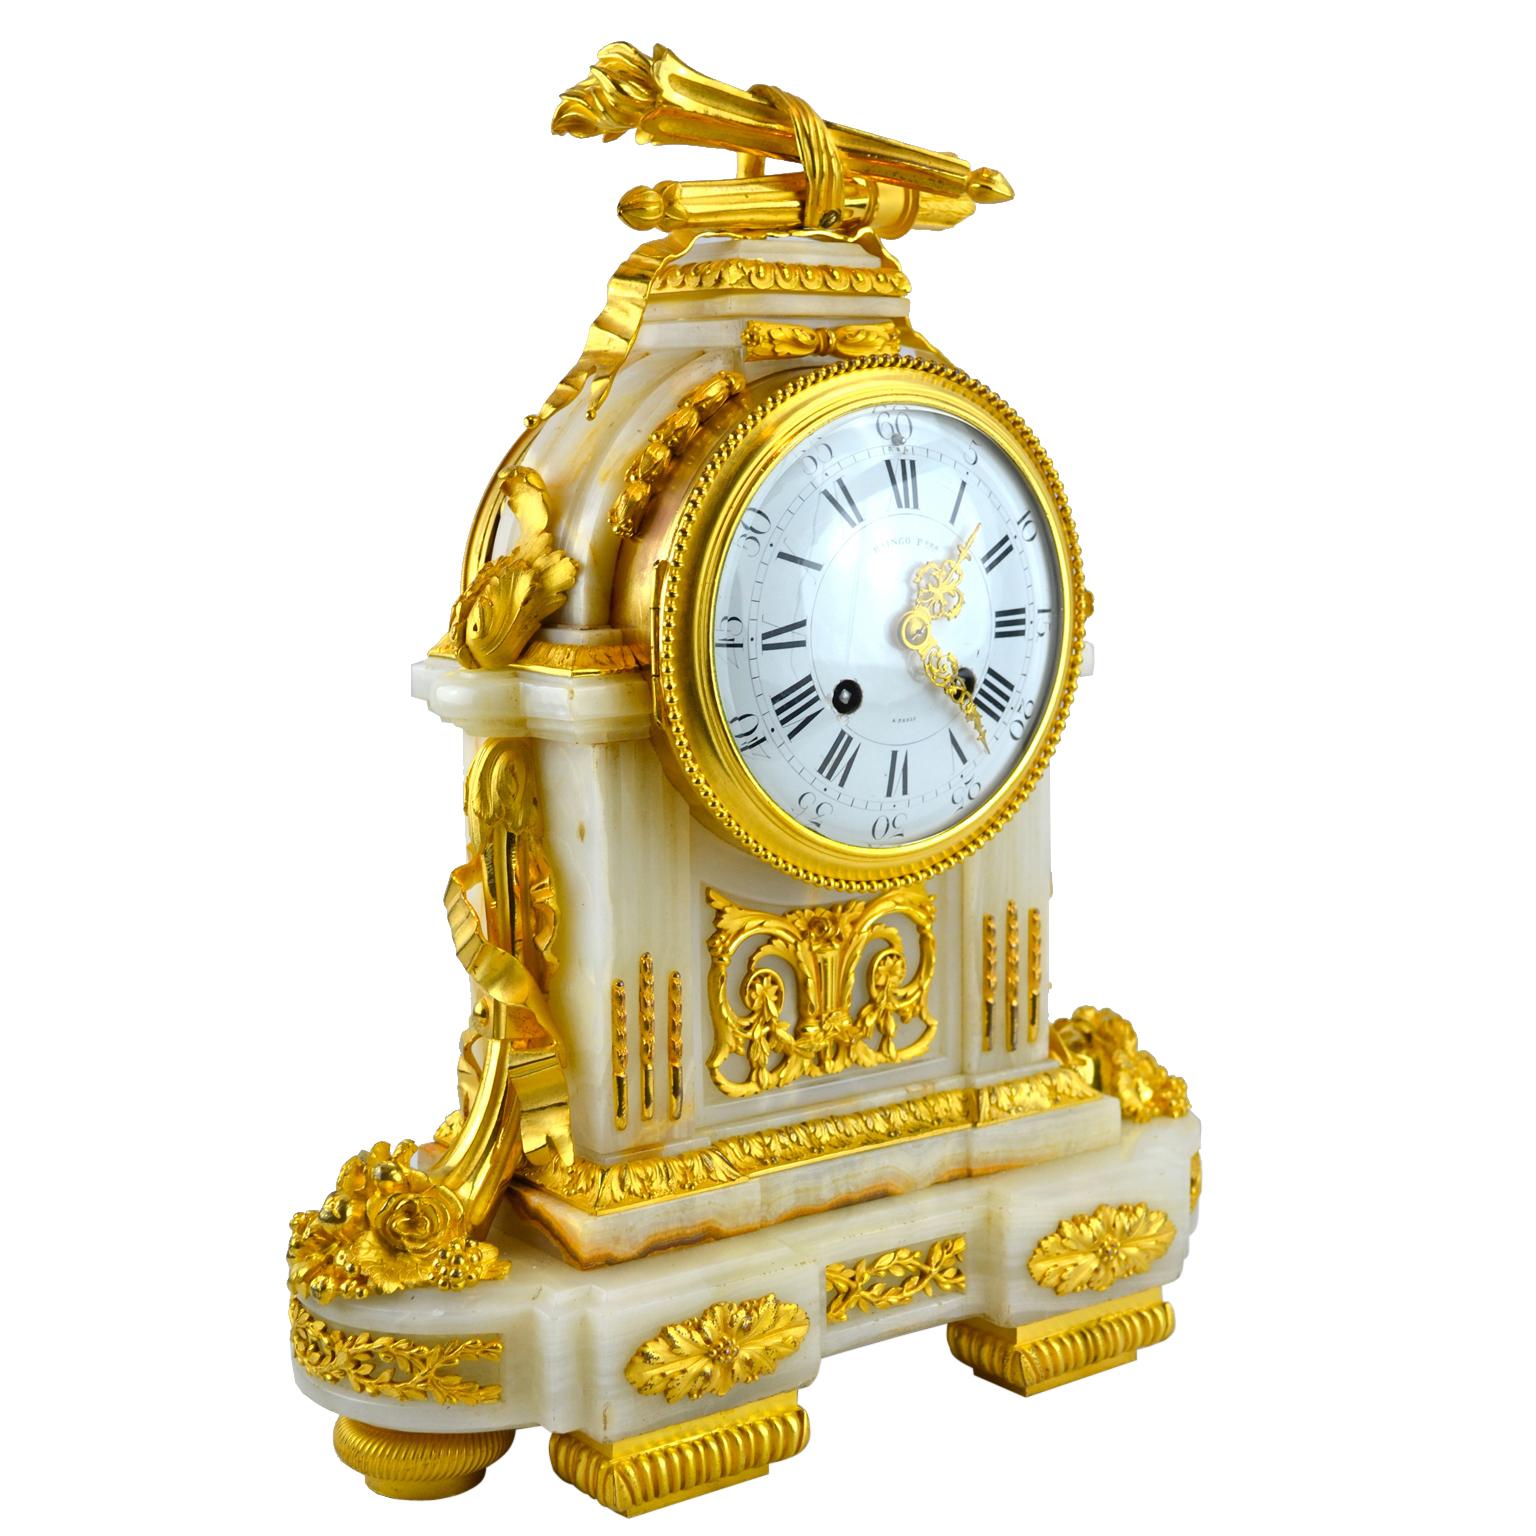 A louis XVI-style ormolu and onyx clock with a white onyx case of architectural form. The clock has fluted pilasters on each side of the dial and is highly decorated with the finest chased and gilded bronze mounts, incorporating quivers and arrows,